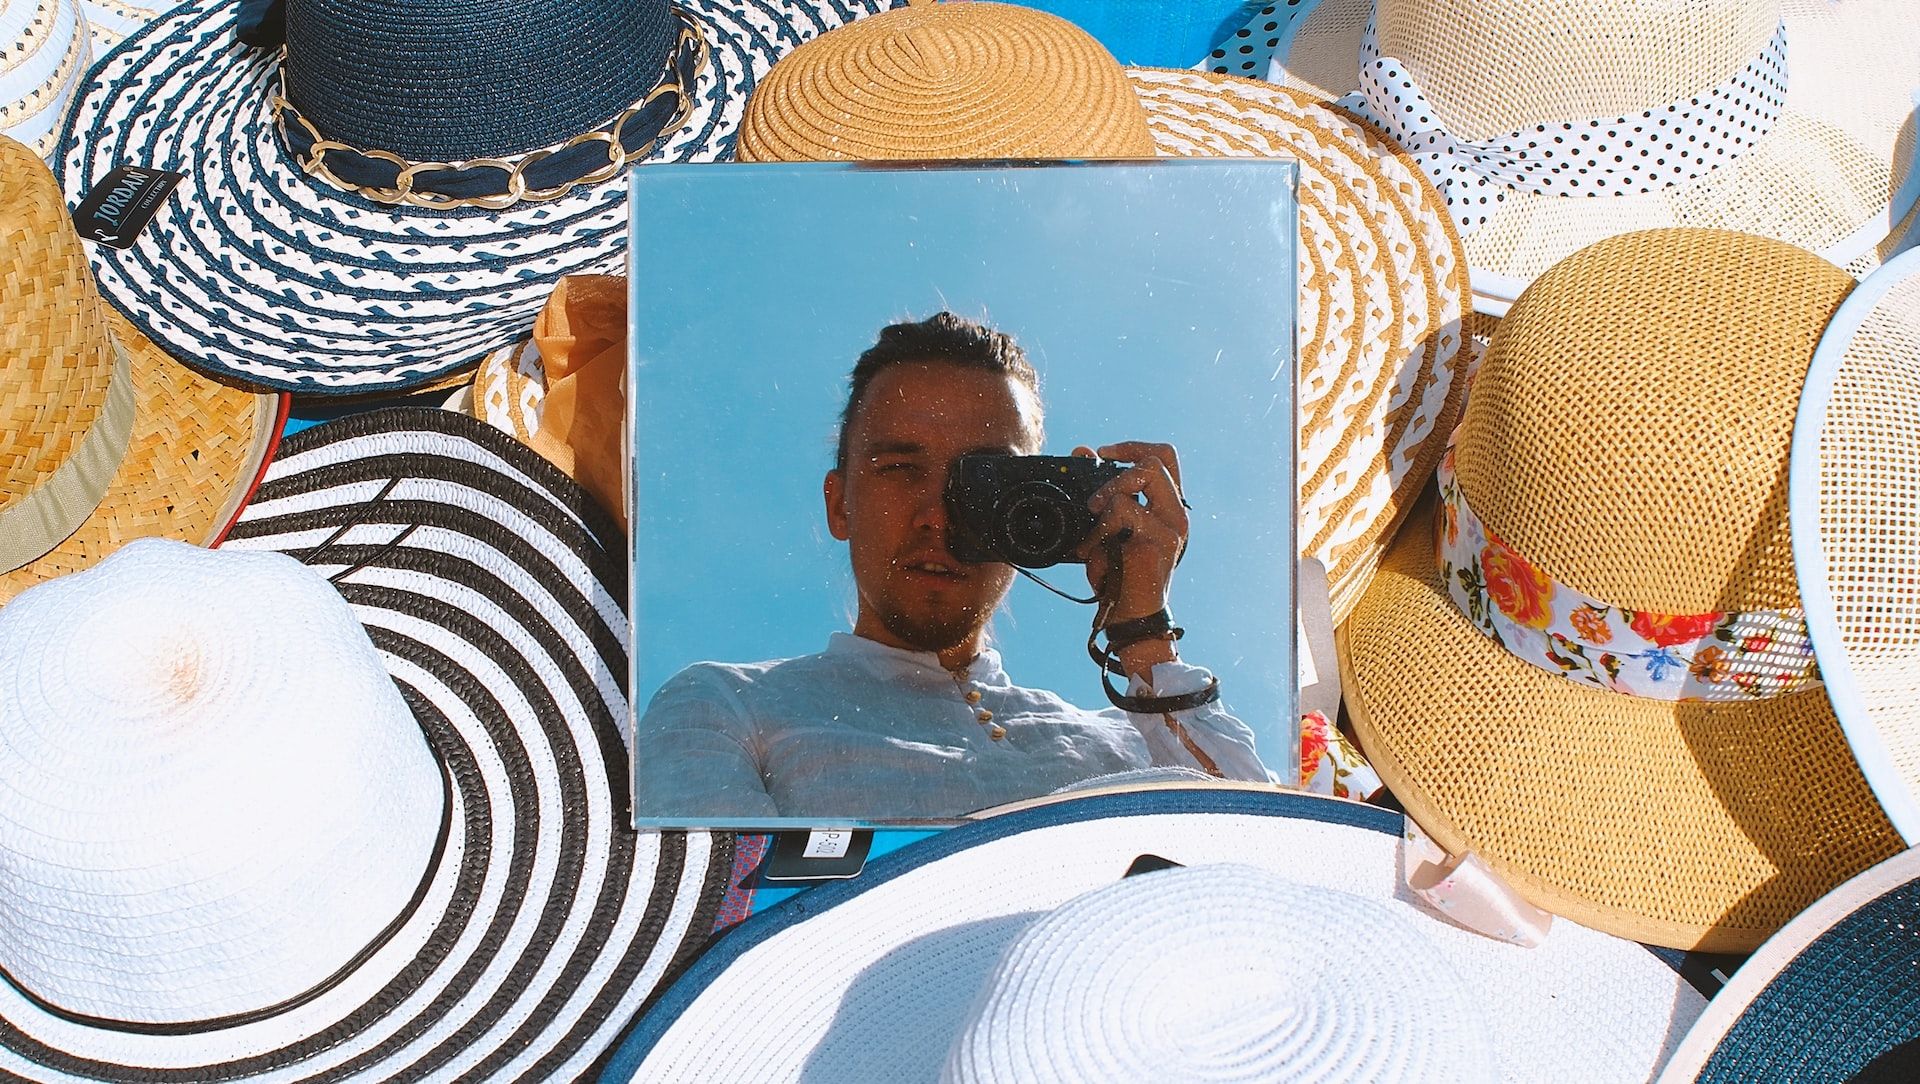 Man taking a self portrait using a mirror that is surrounded by summer hats.